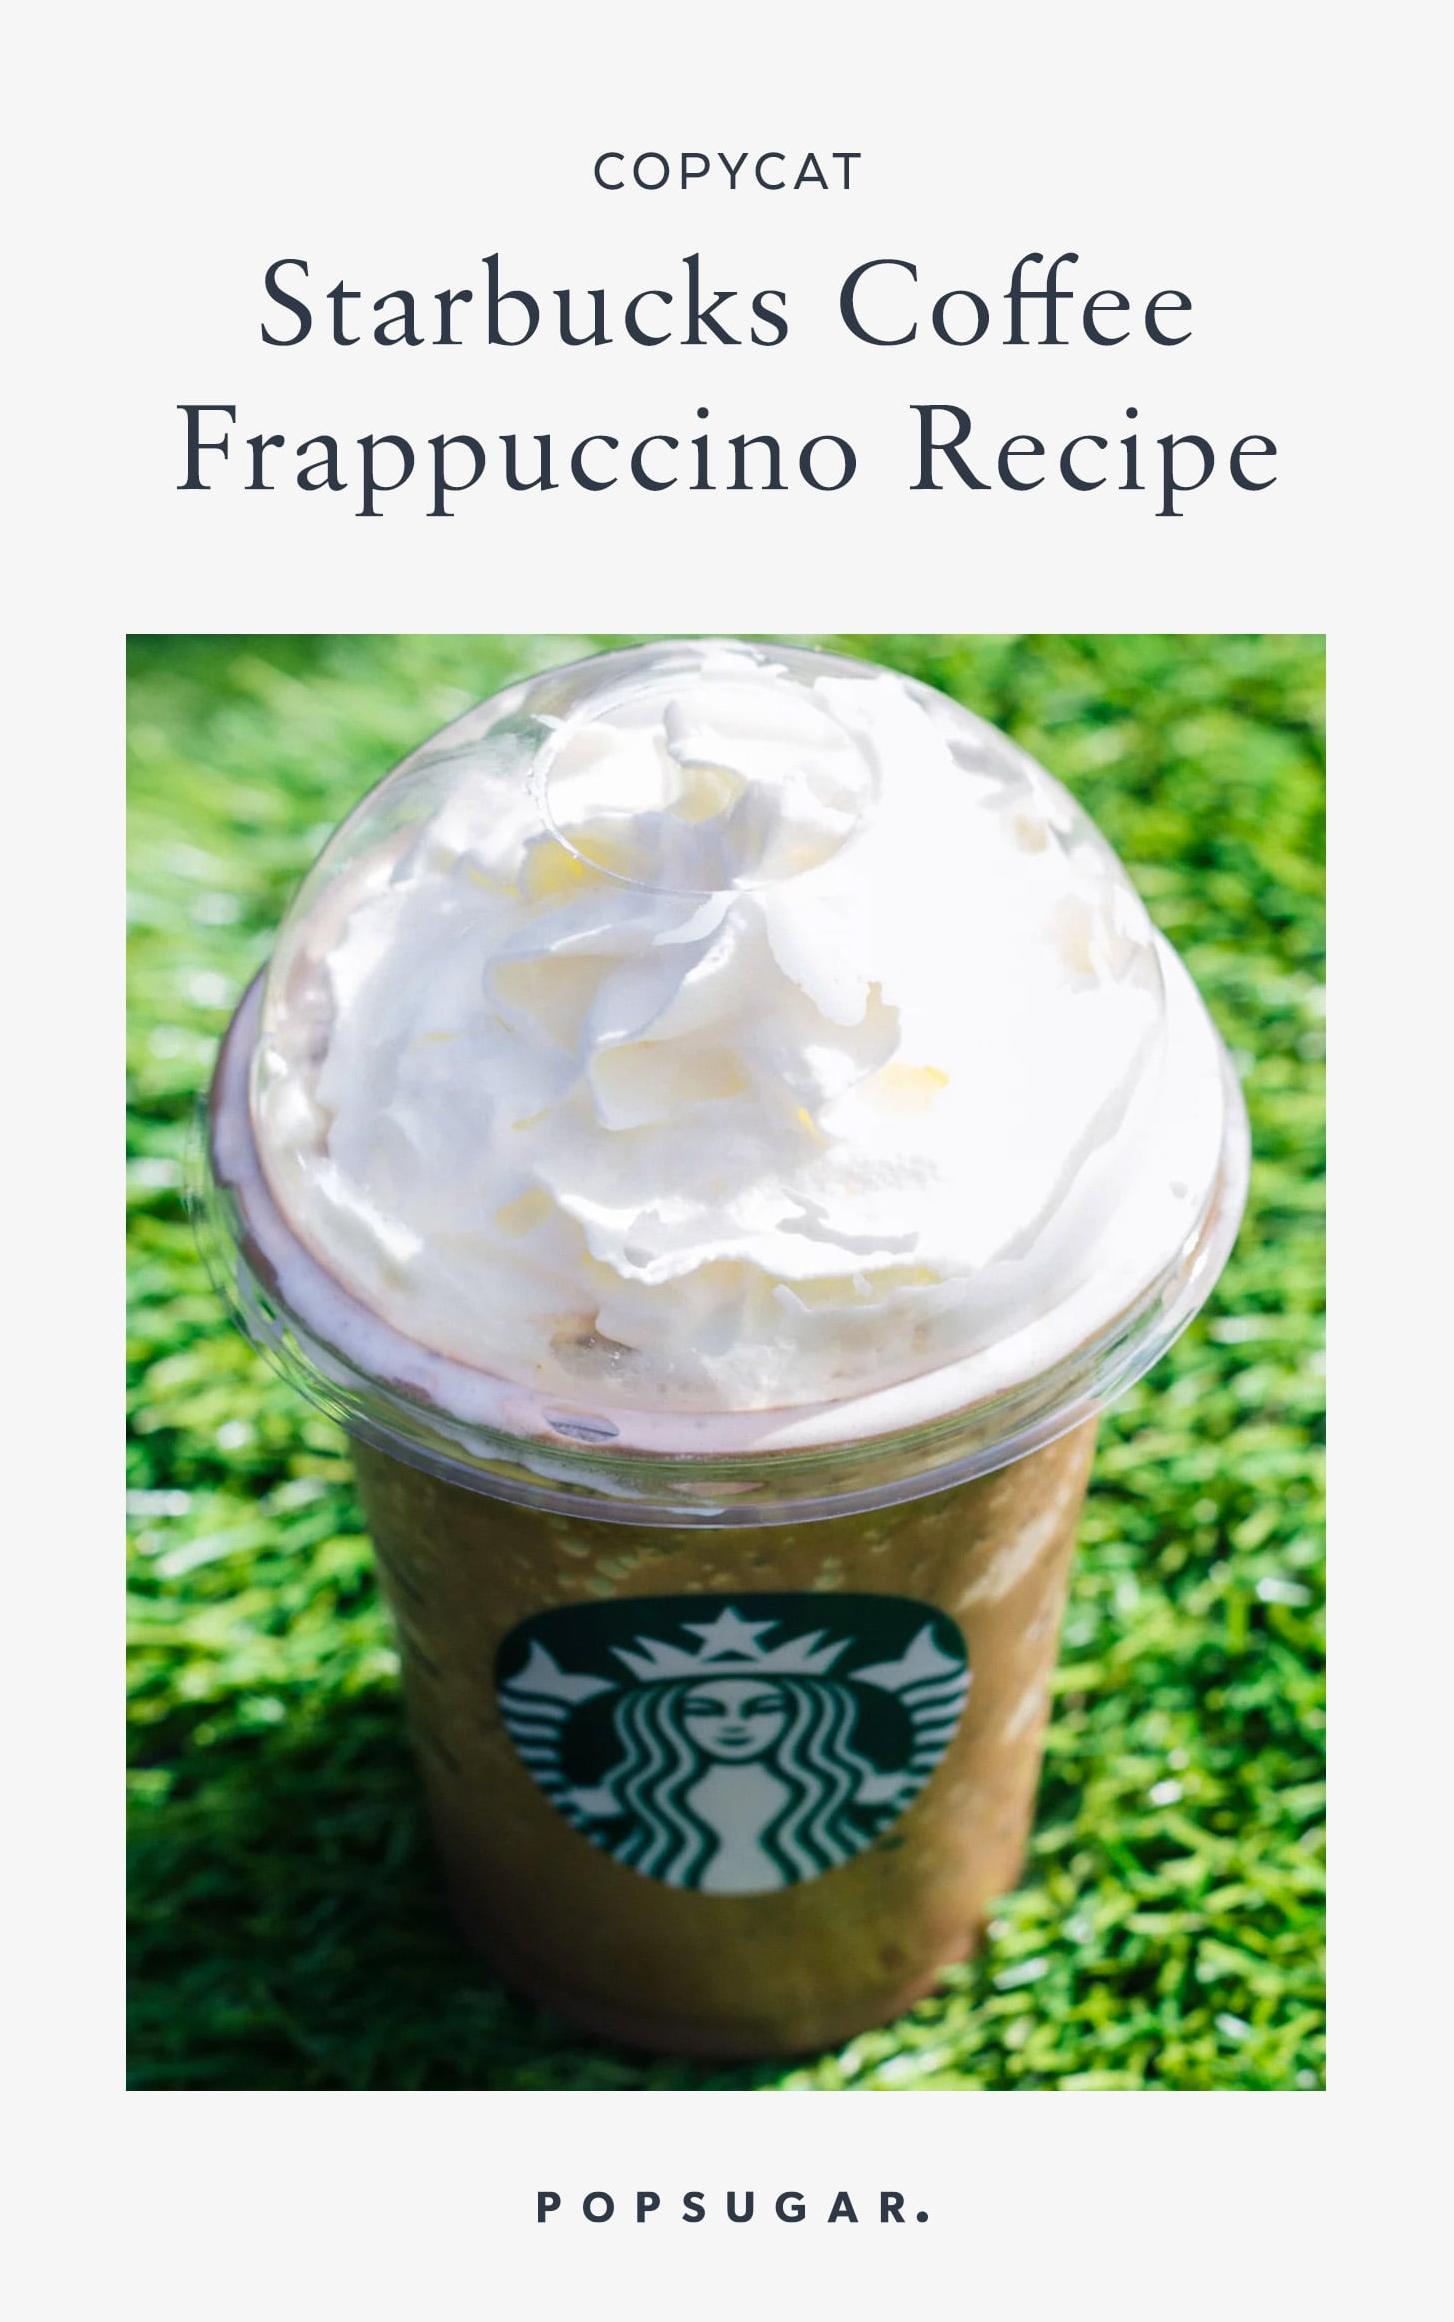  Say goodbye to overpriced coffee and hello to your own delicious creation!